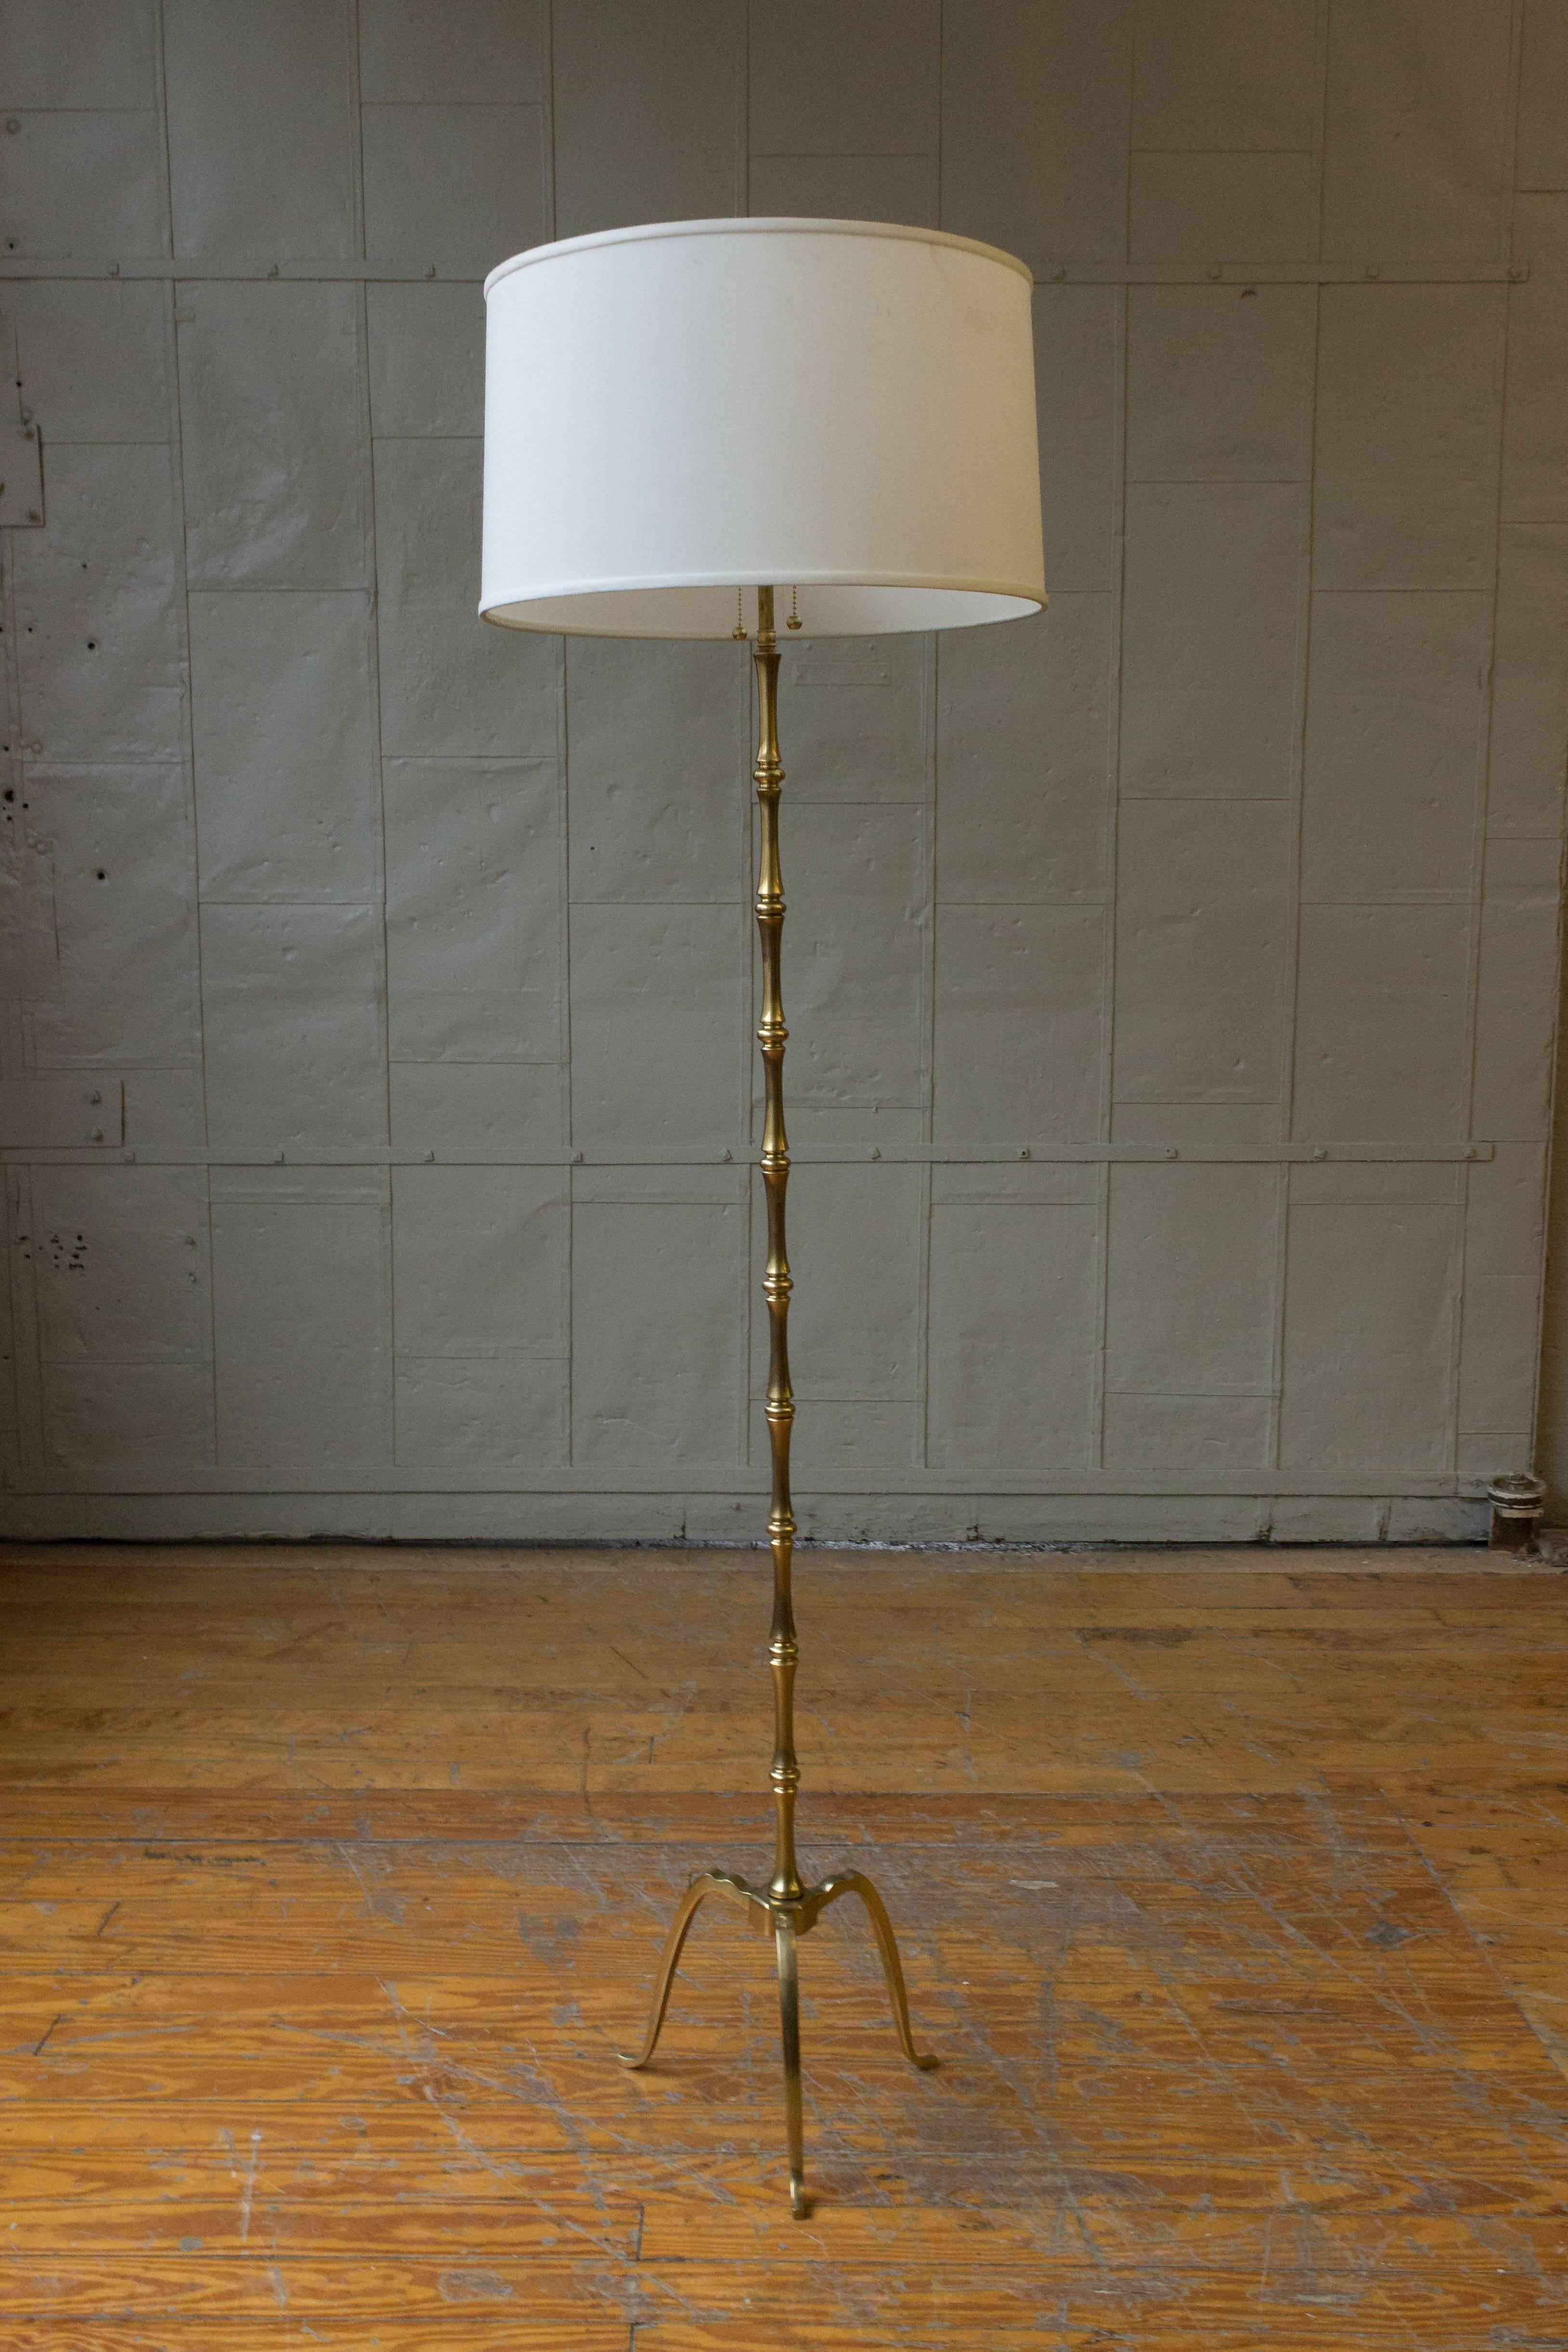 Gilt bronze and brass floor lamp on a tripod base, French, 1940s. Shade not included.

